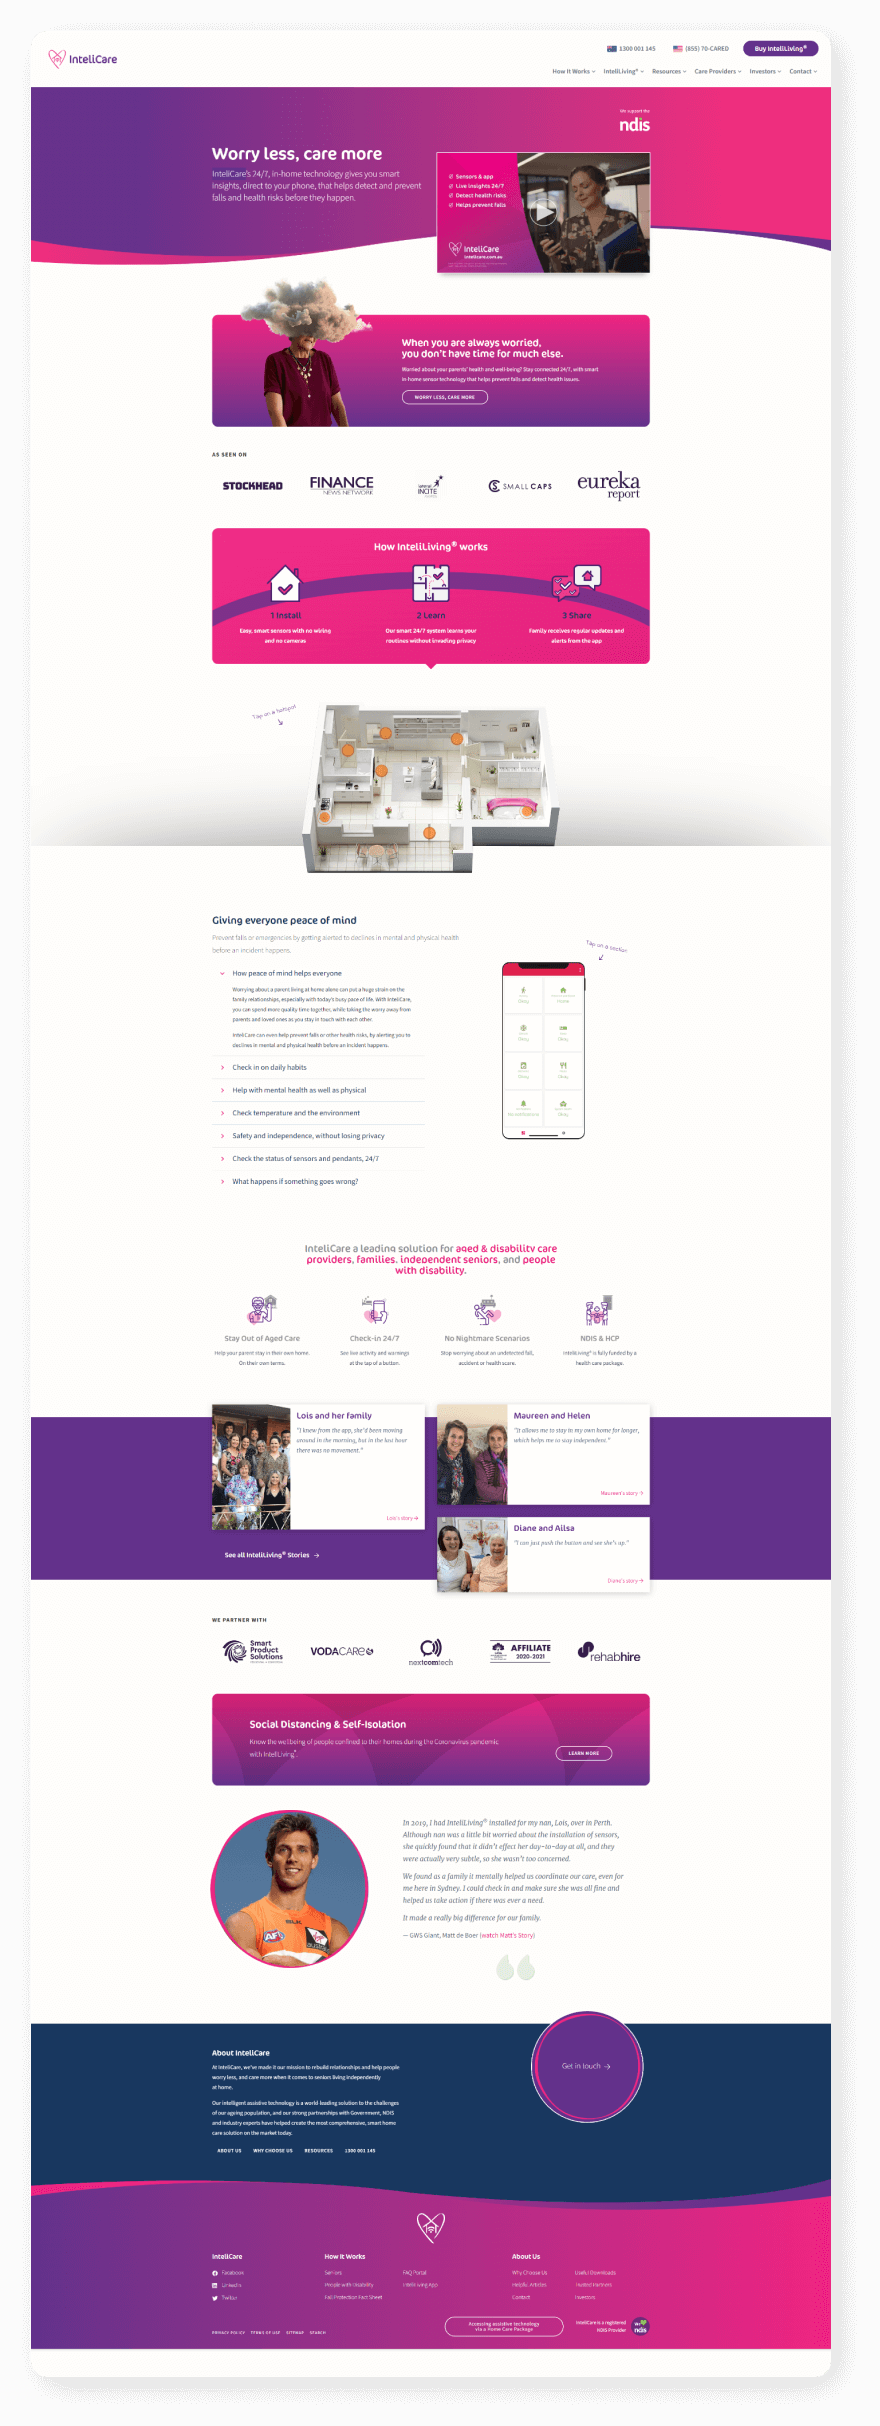 Home page design of InteliCare, built by Perth Website Studio